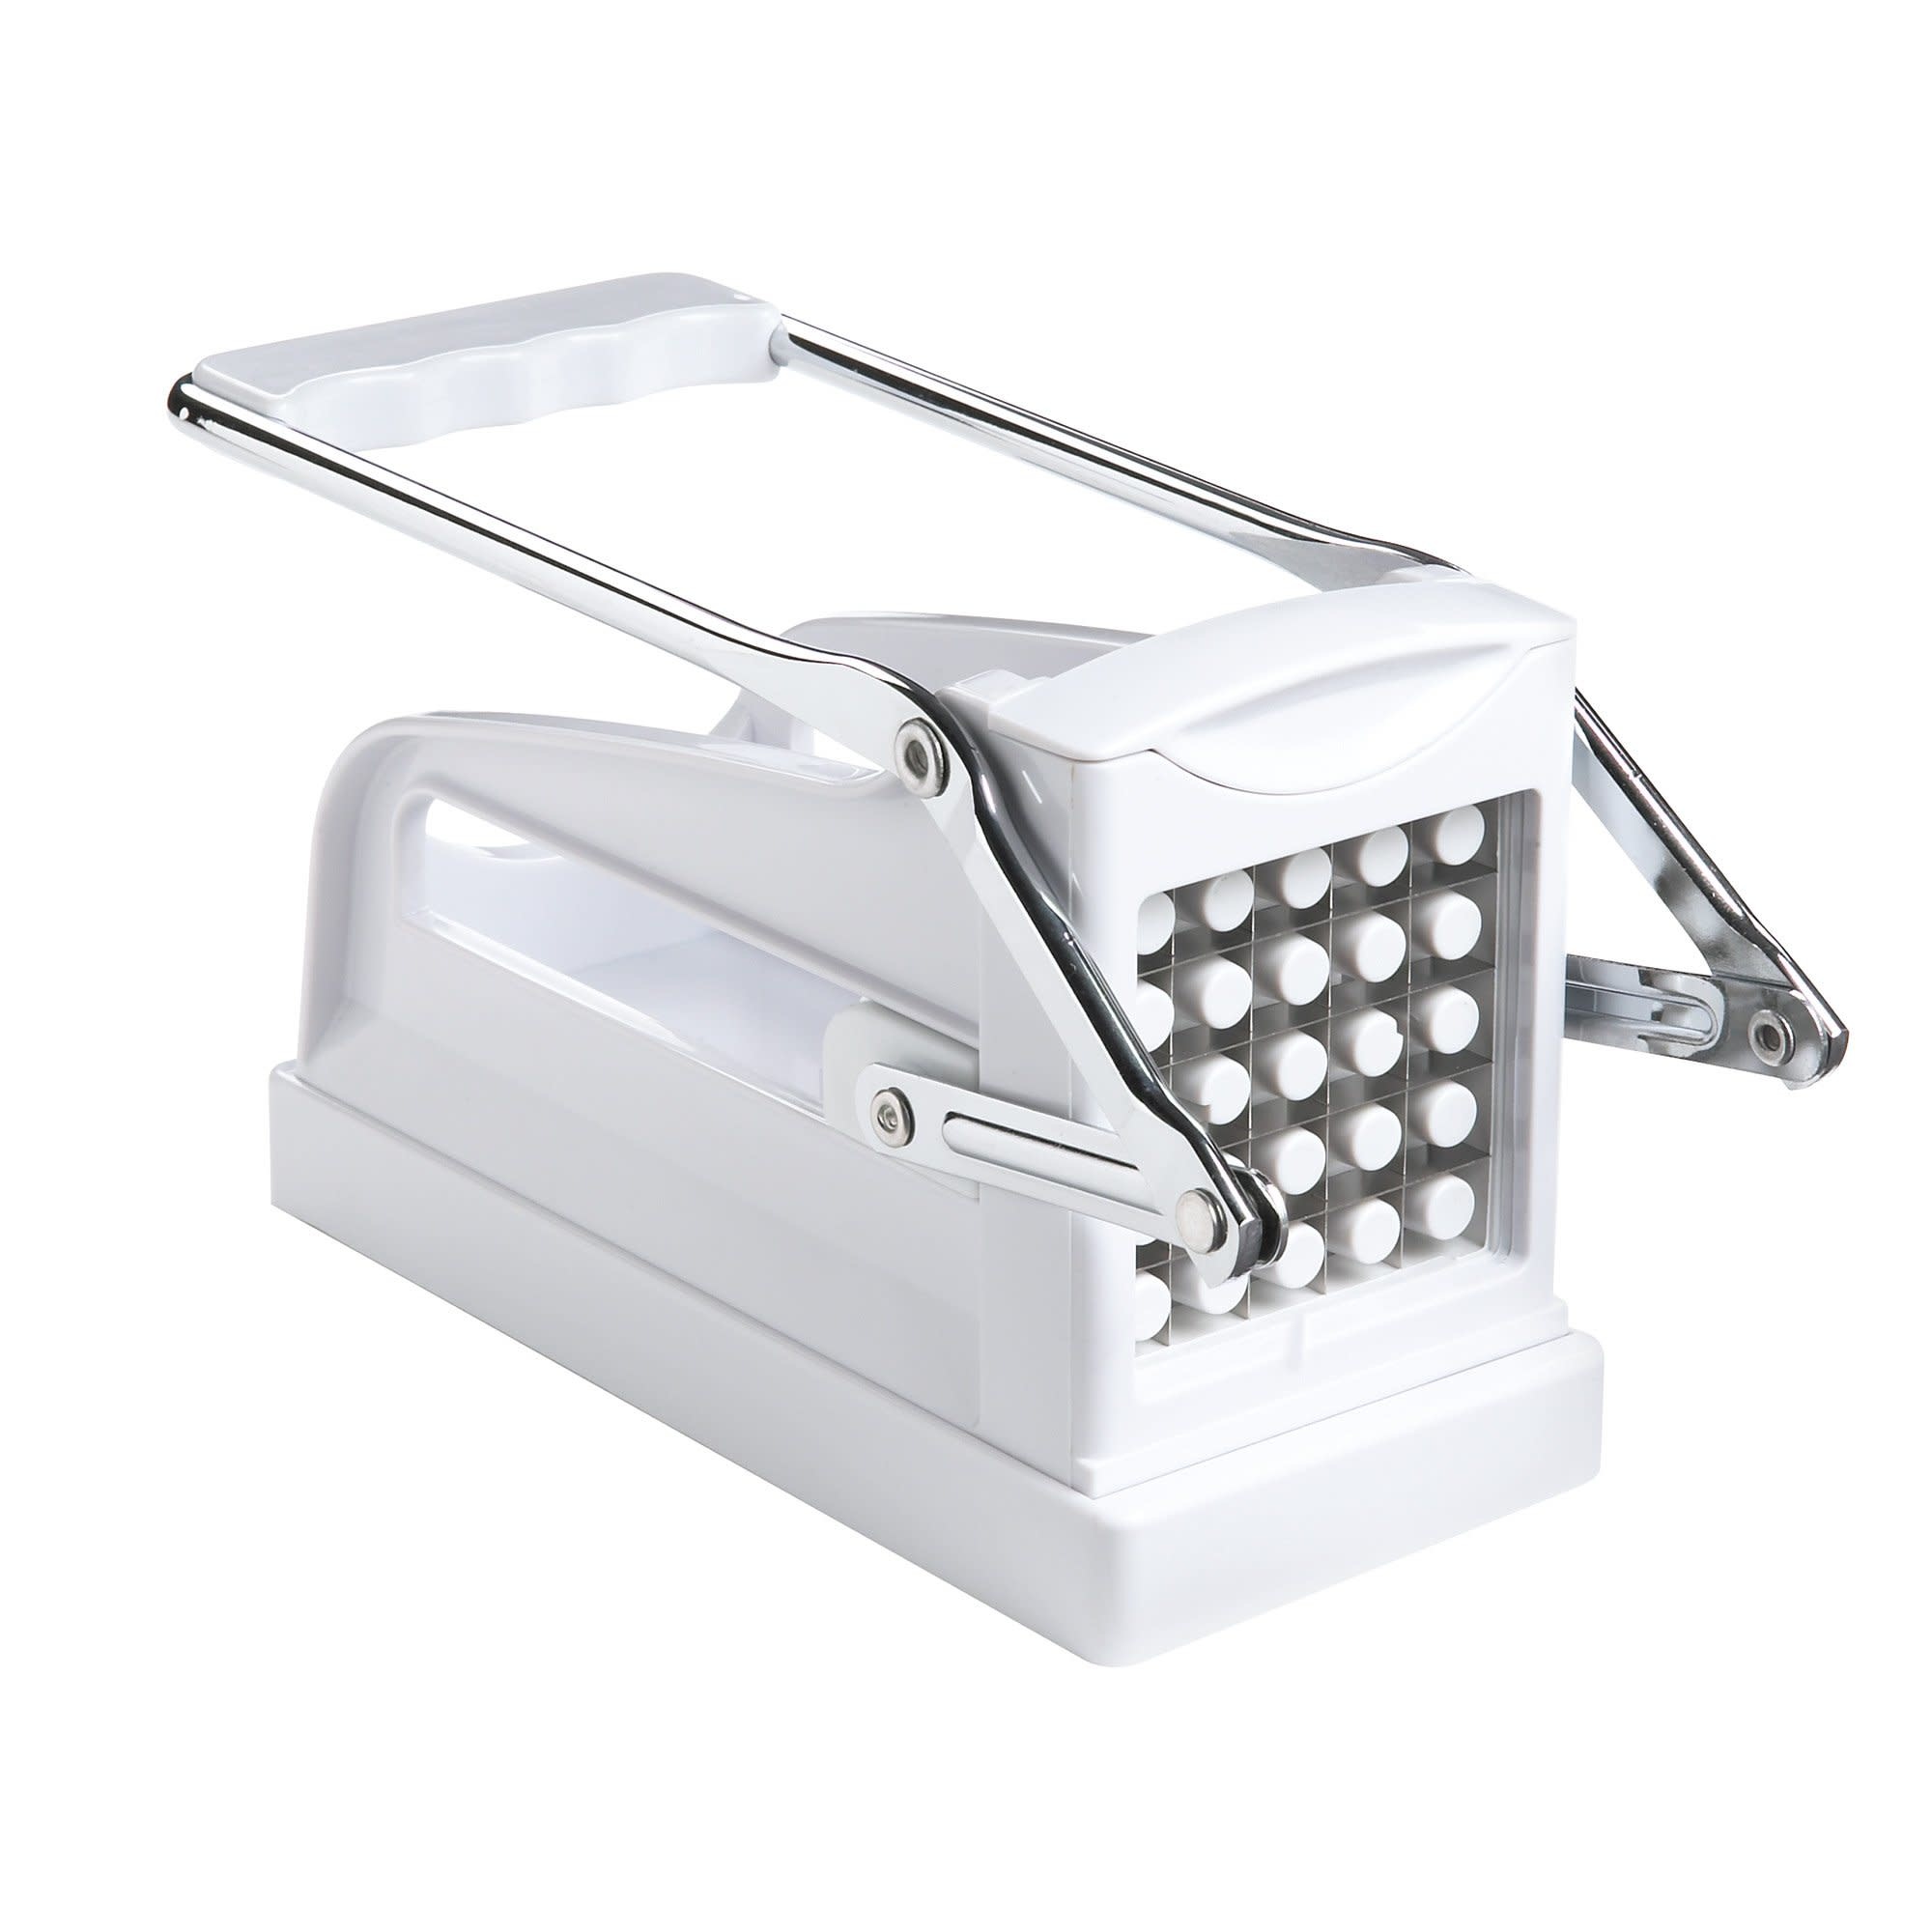 RSVP French Fry Cutter